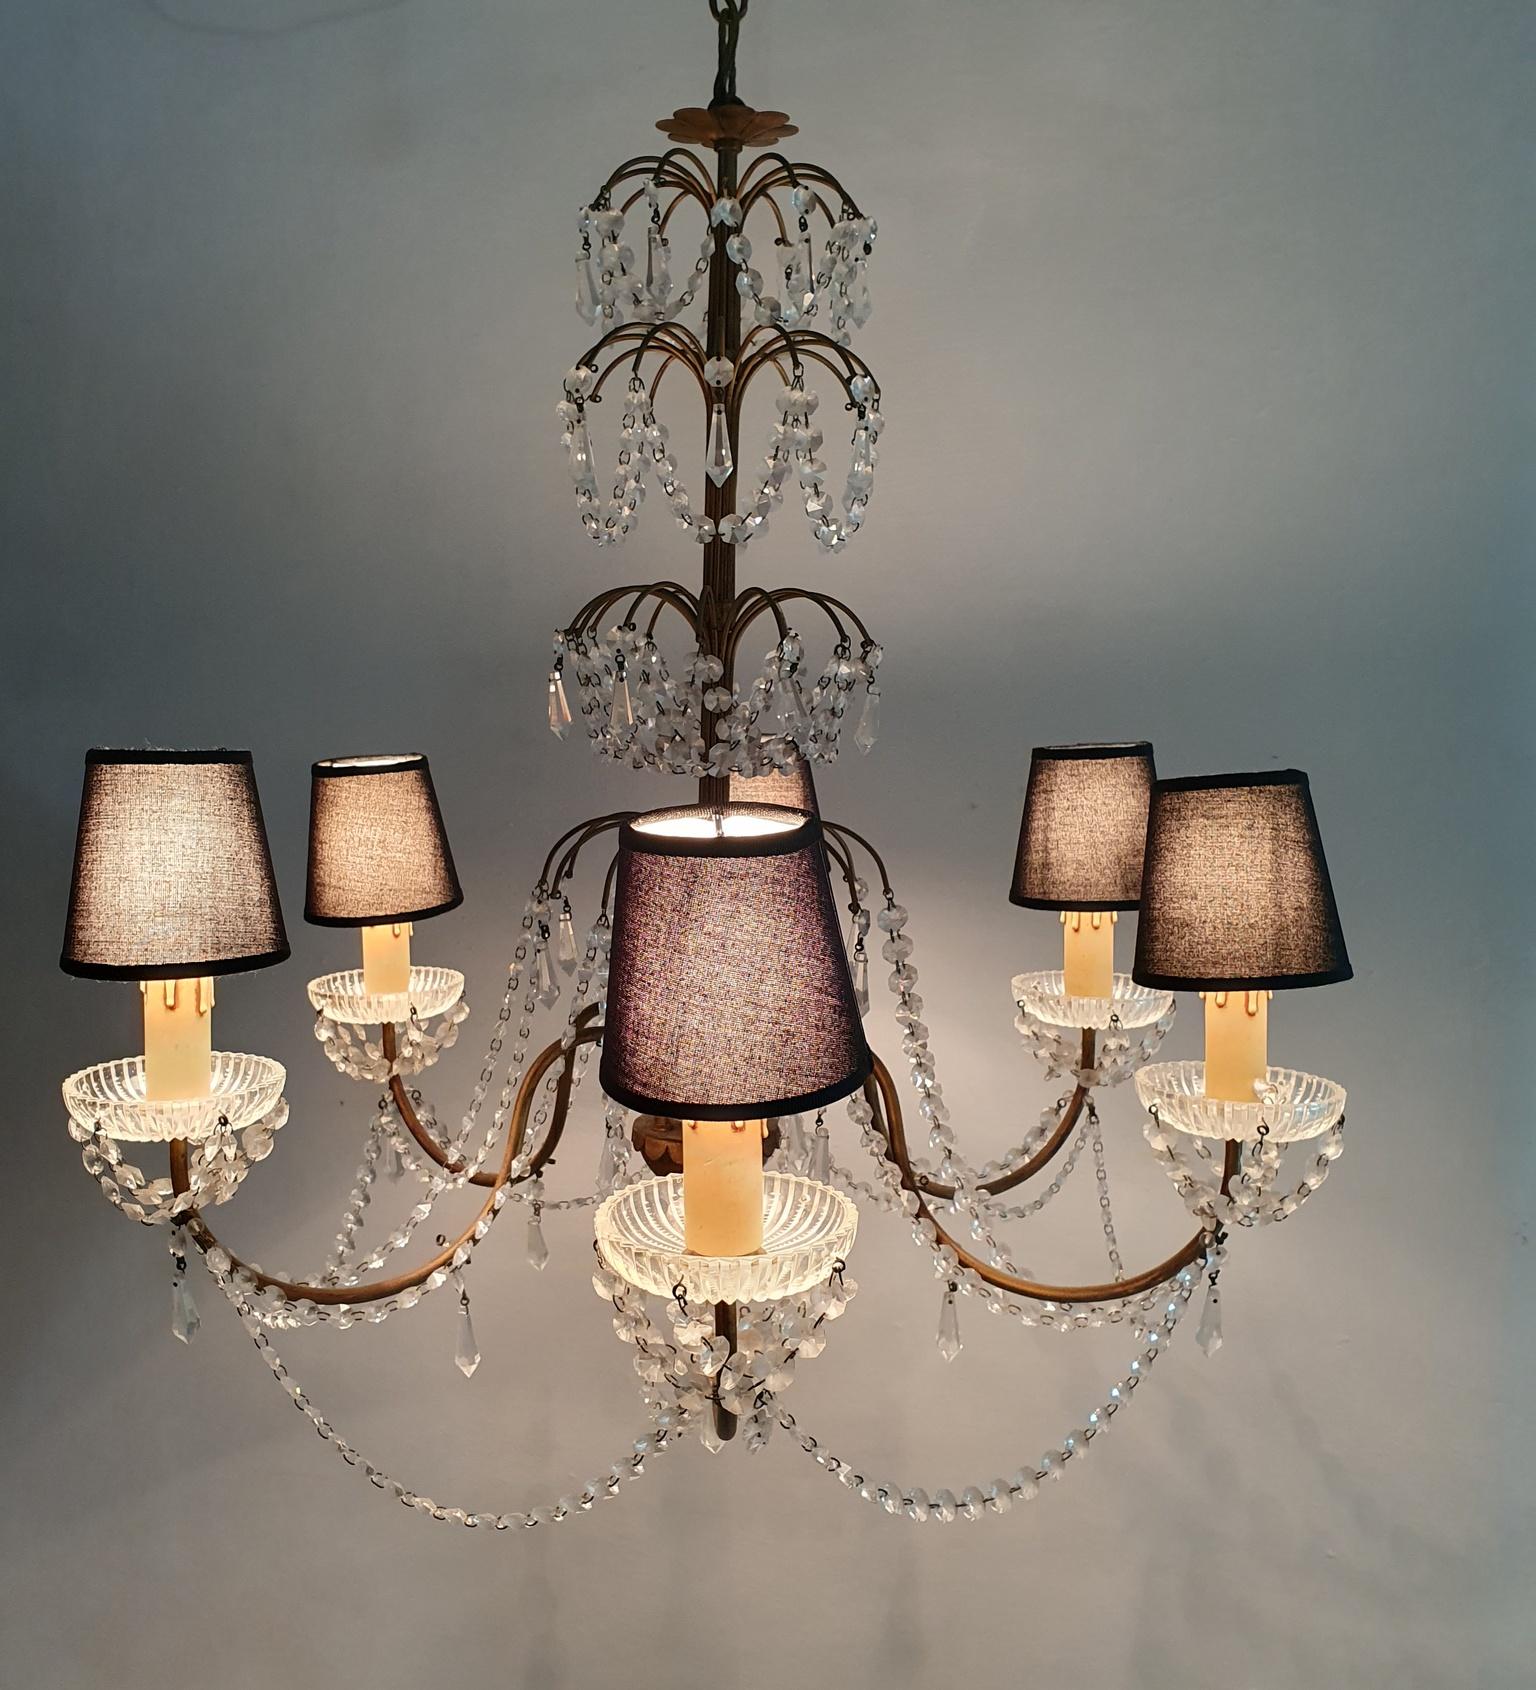 This beautiful chandelier boasts a Florentine Rococo style and is handmade in Florence, Italy circa 1950. The gilded iron frame is adorned with an array of crystals, which exude a soft and delicate glow when illuminated. This timeless design is a